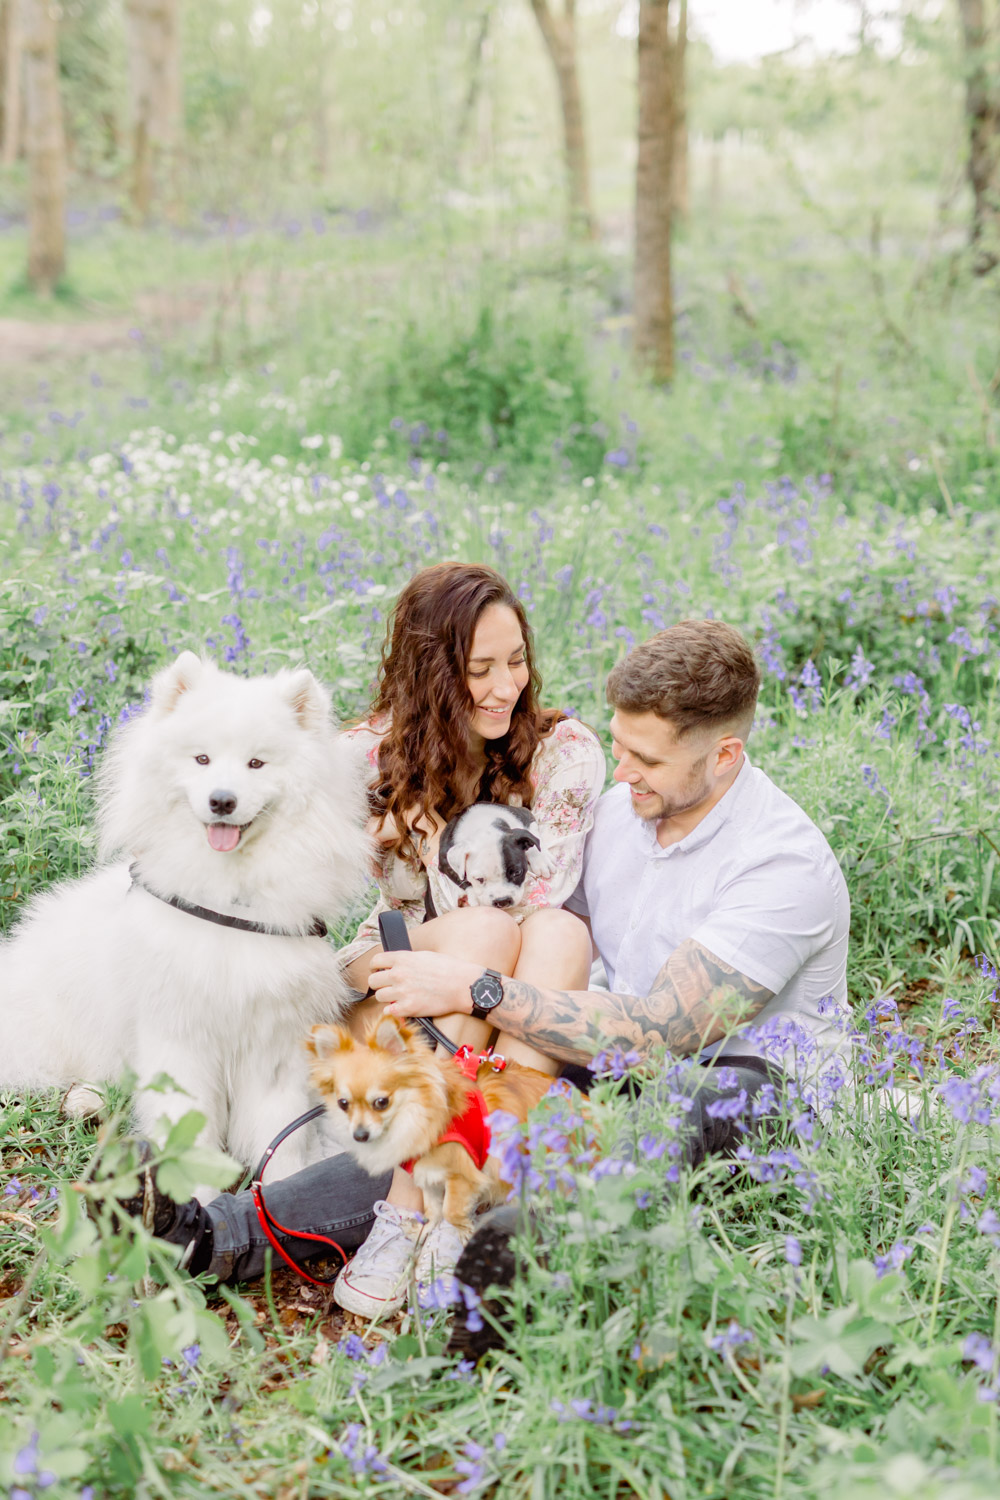 Couple photoshoot in bluebell Oakley Wood with puppies - Leamington Spa